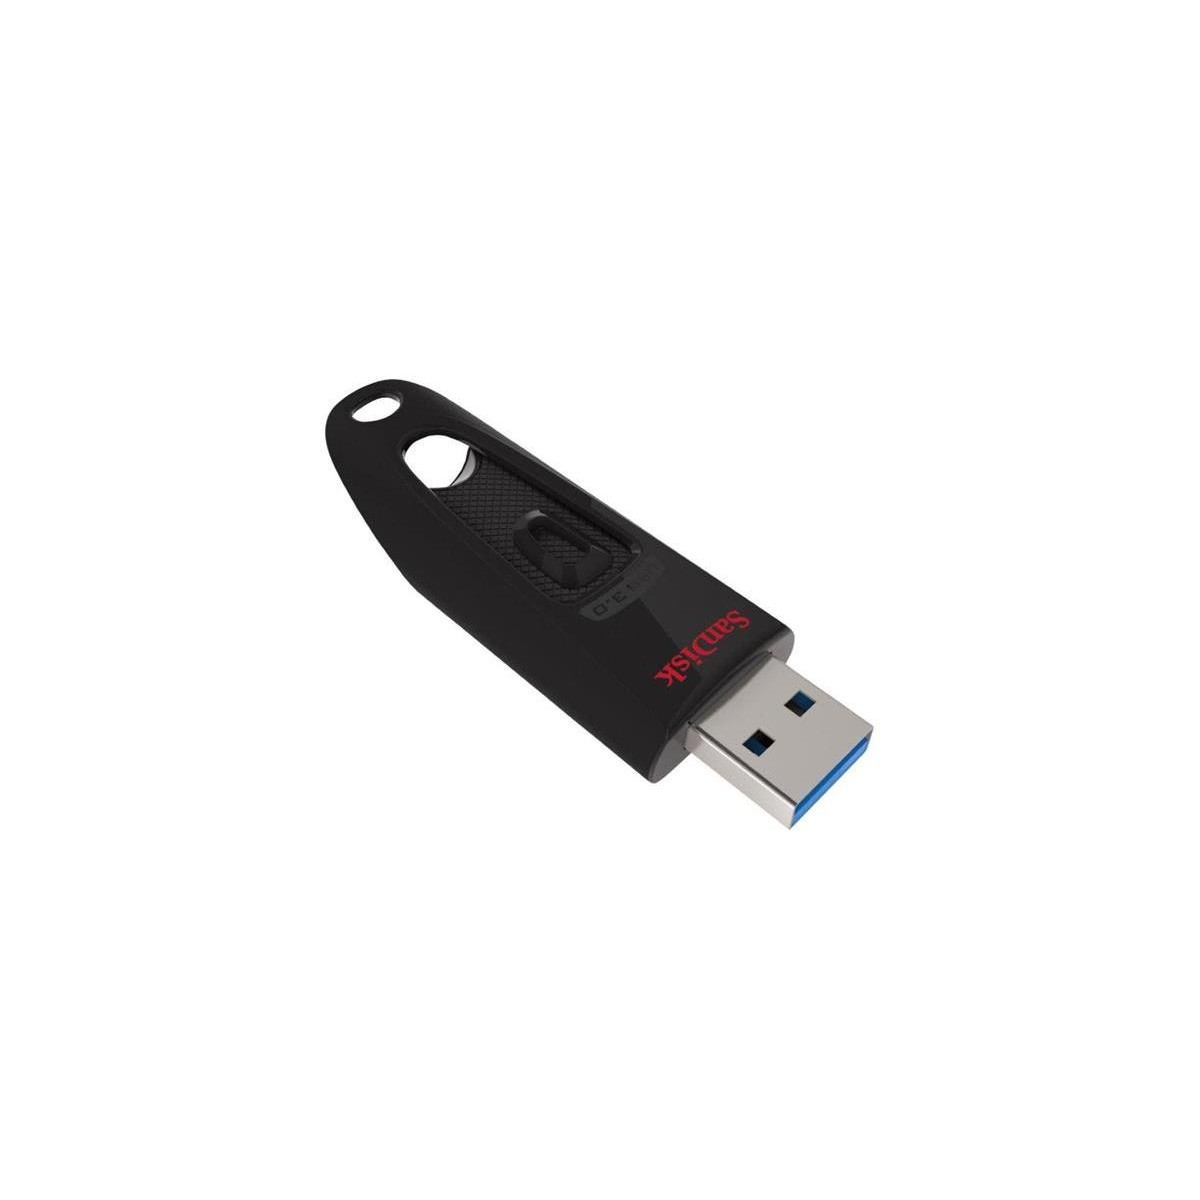 More about Flash disk SANDISK Ultra USB 3.0 256GB 139717